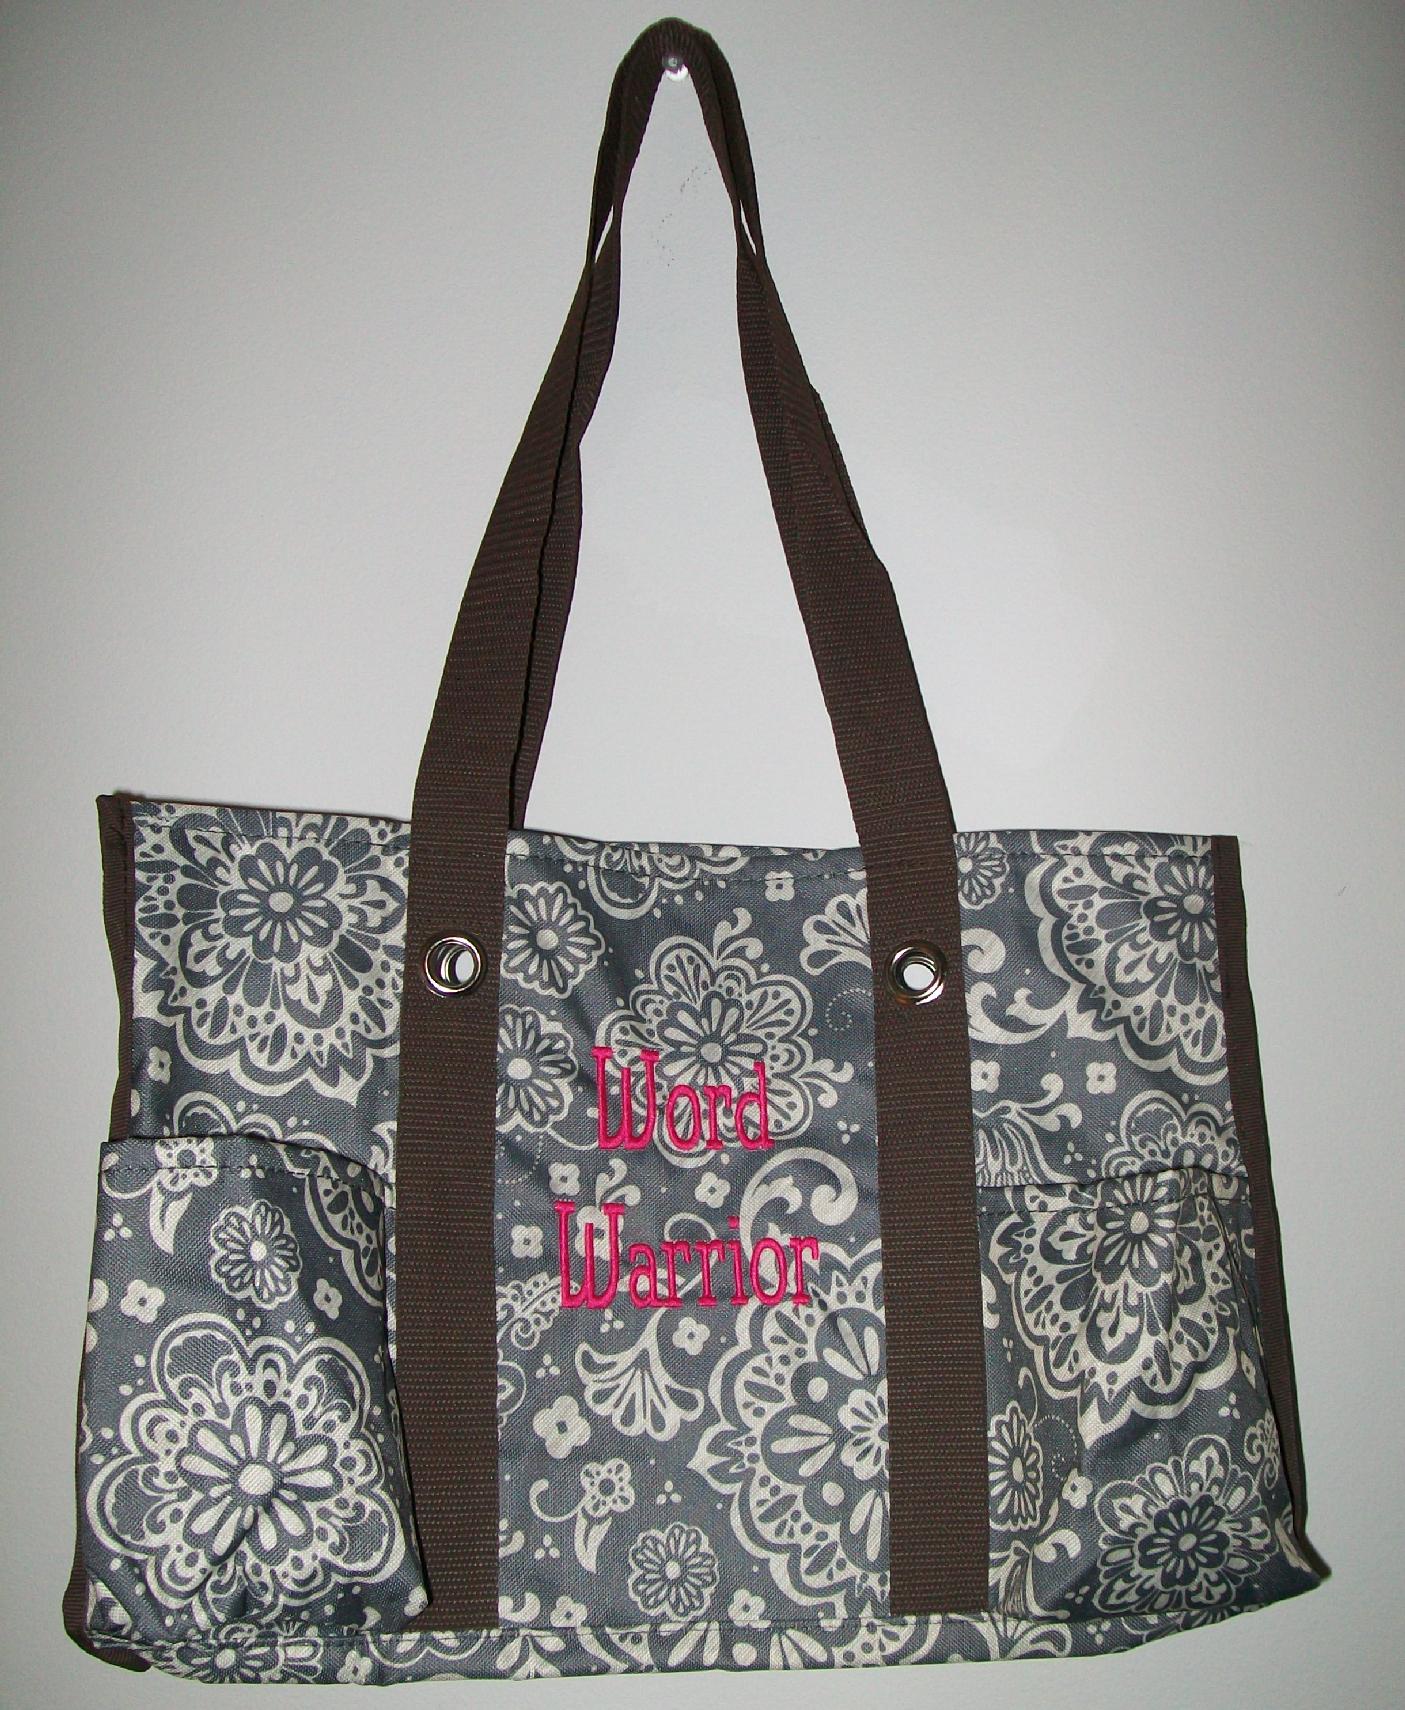 Organizing in Sept. with Great Totes